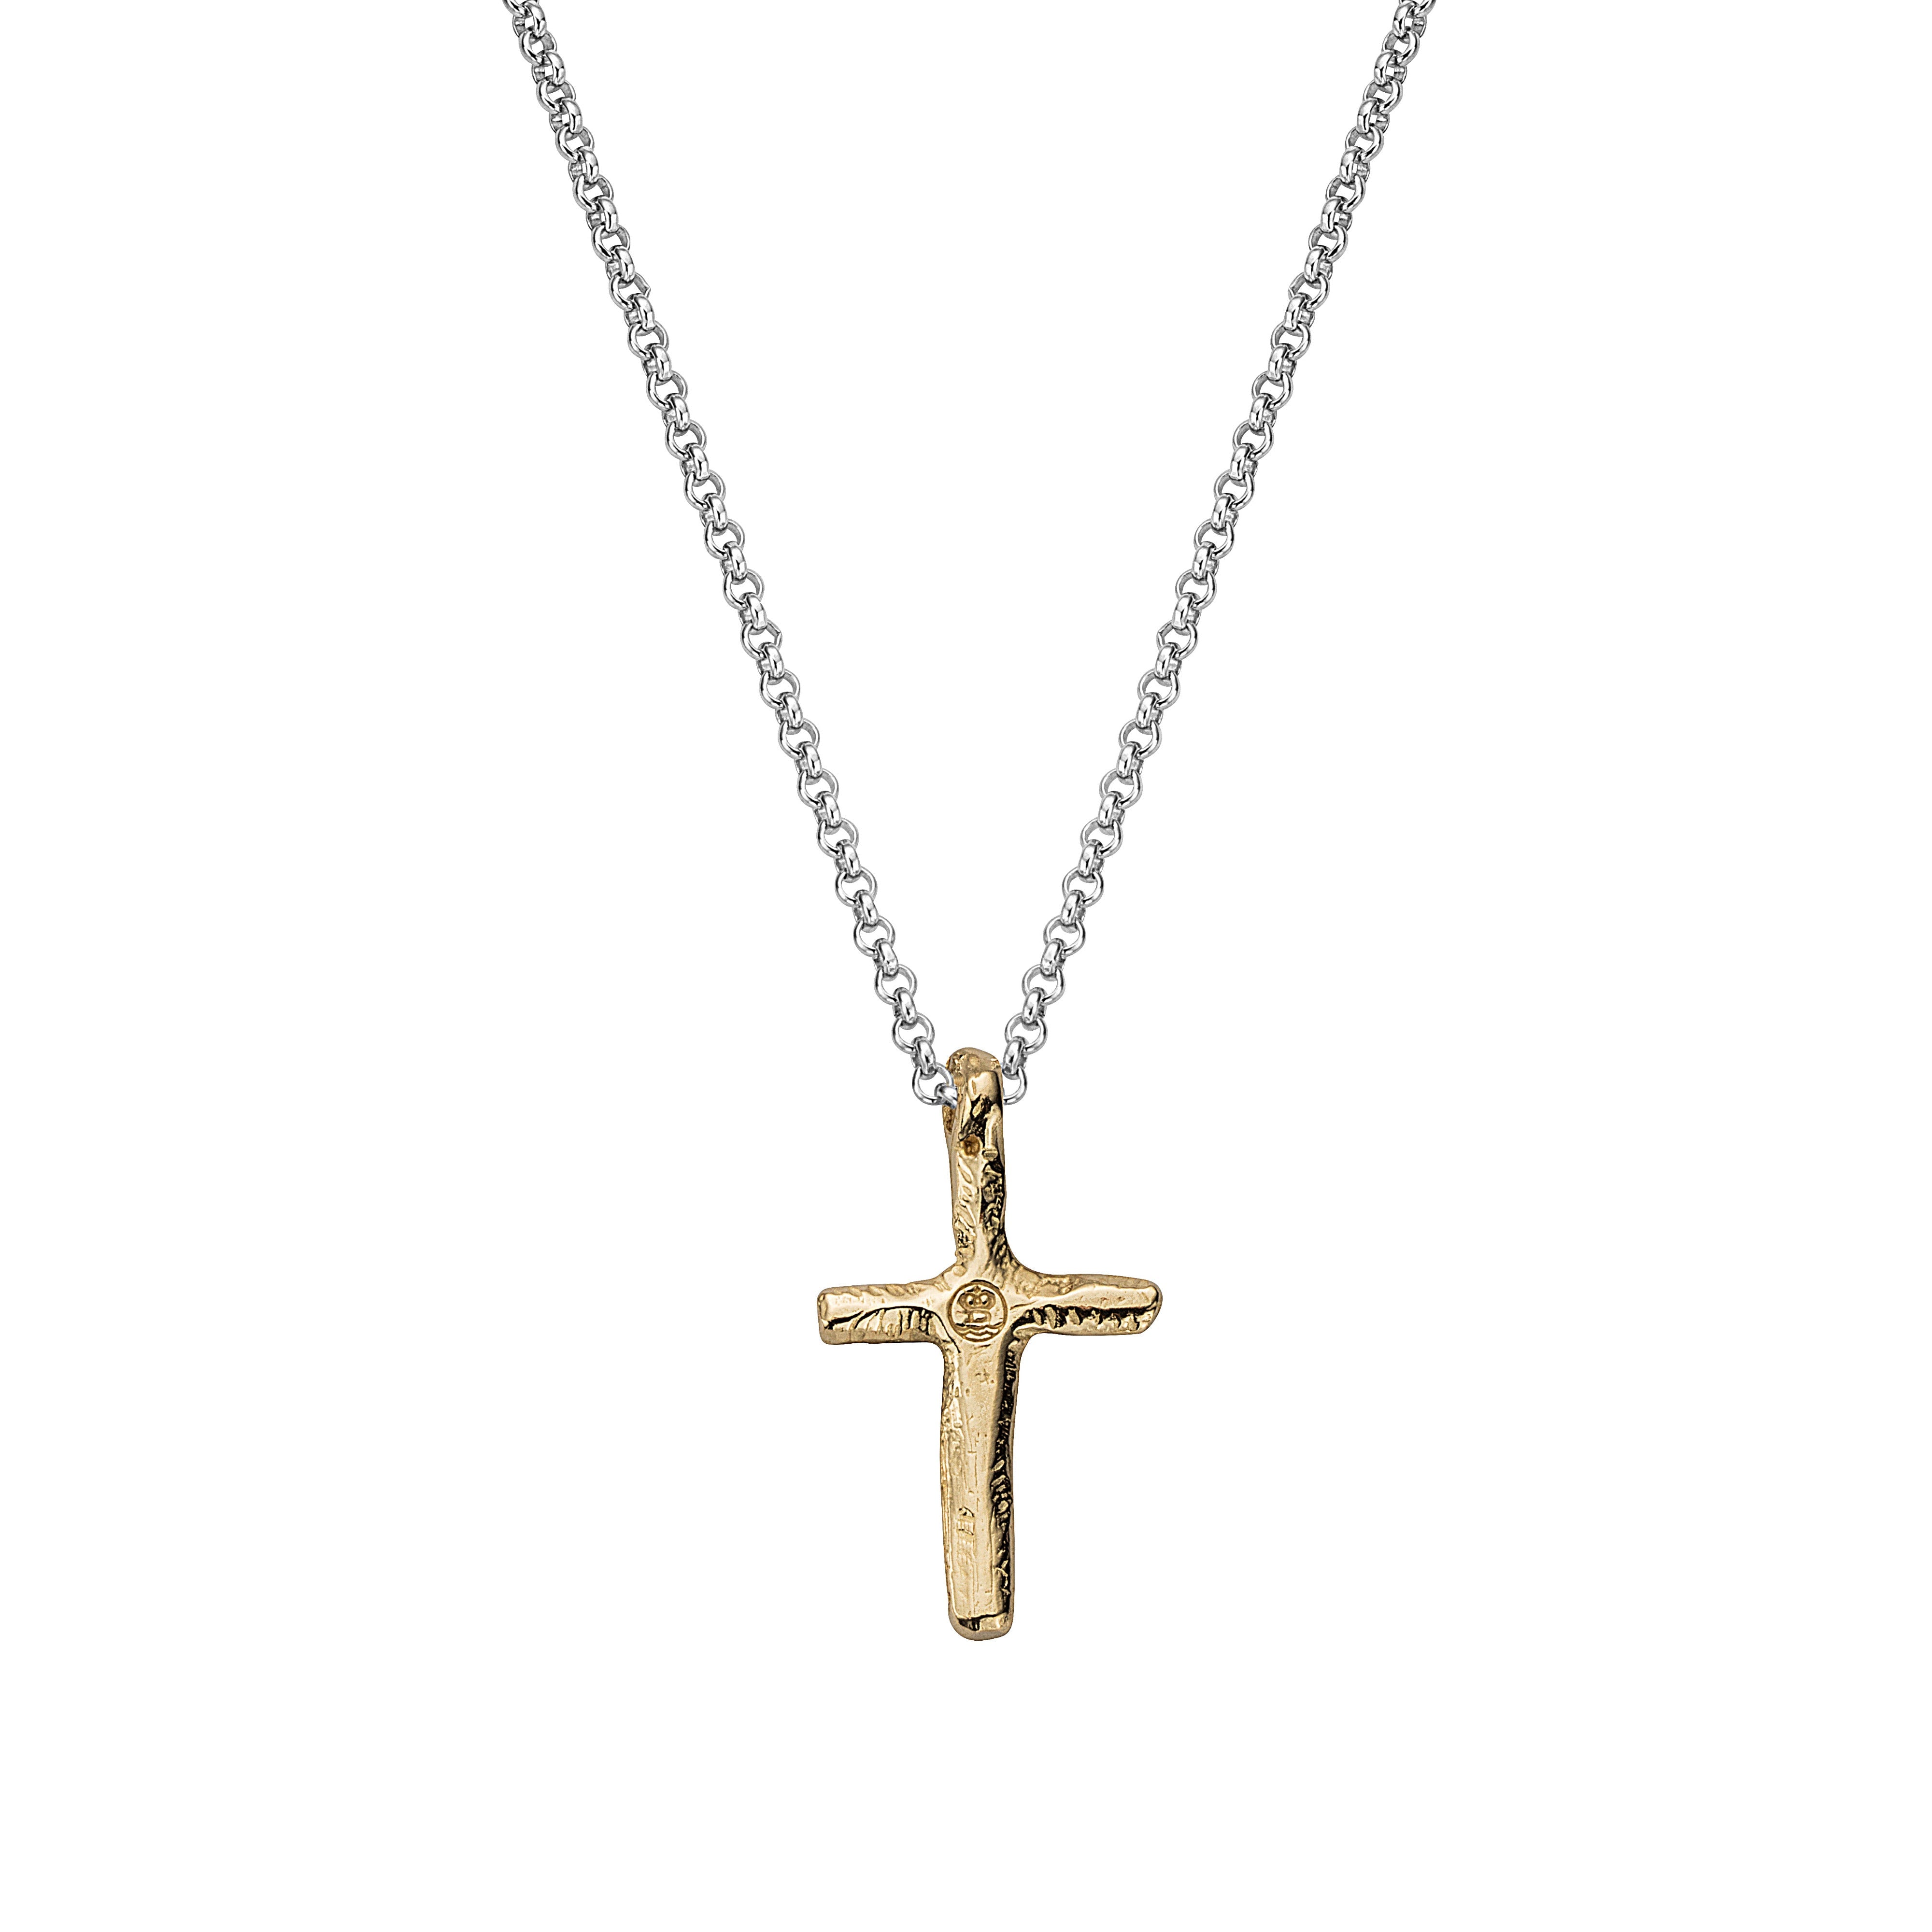 Buy the Silver & Gold Medium Cross Necklace from British Jewellery